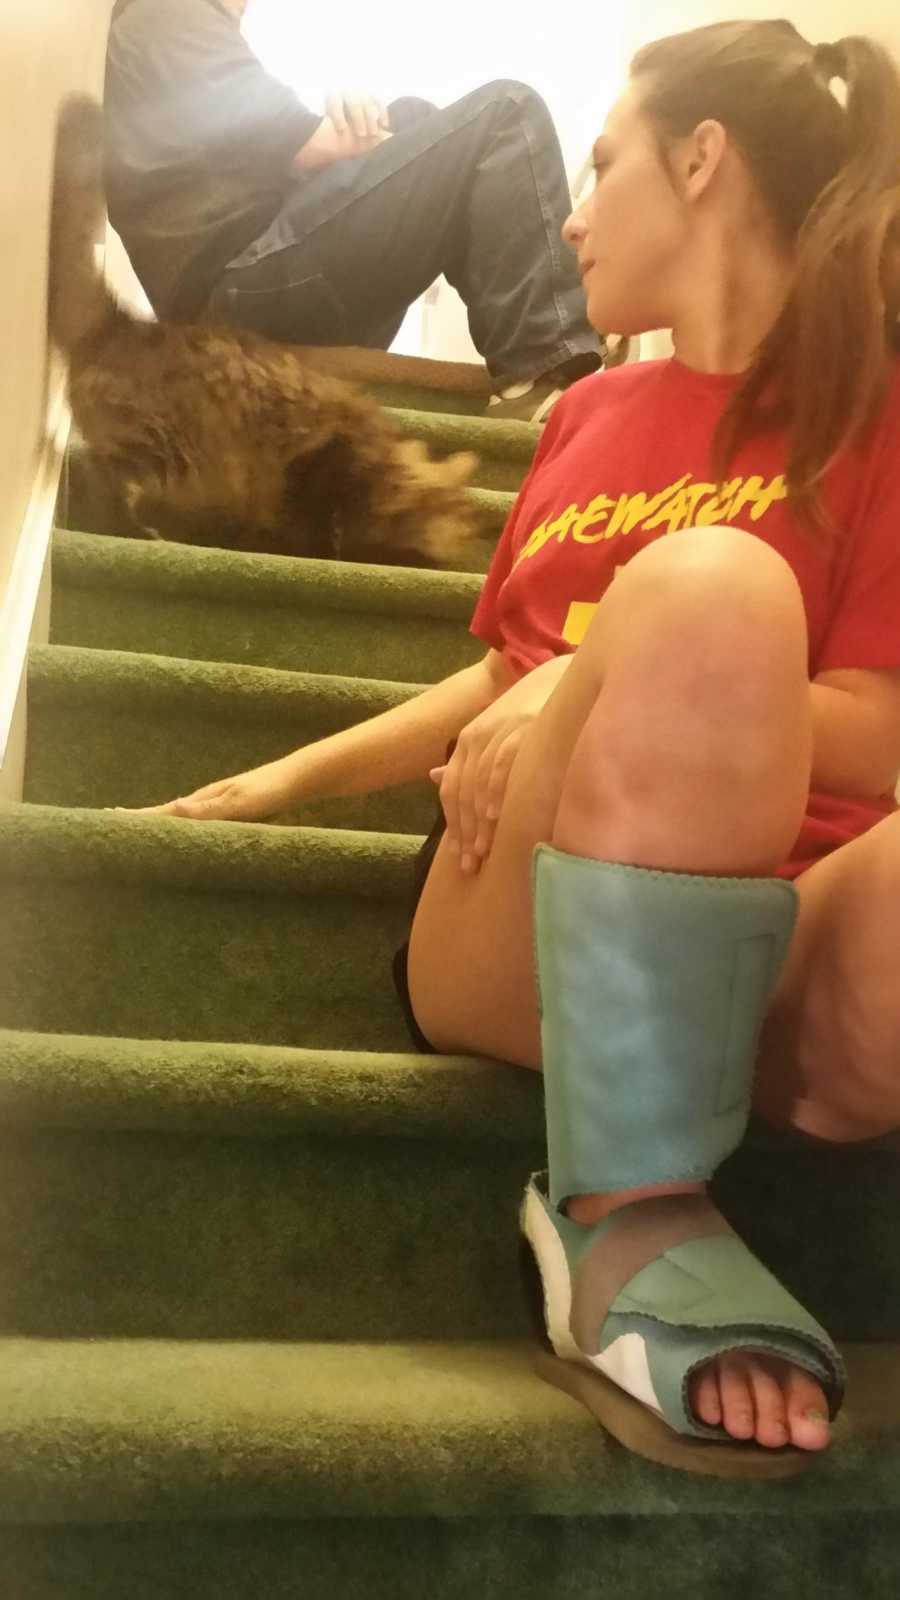 25 year old who overdosed sitting on steps of home with braces on her legs looking back at cat behind her